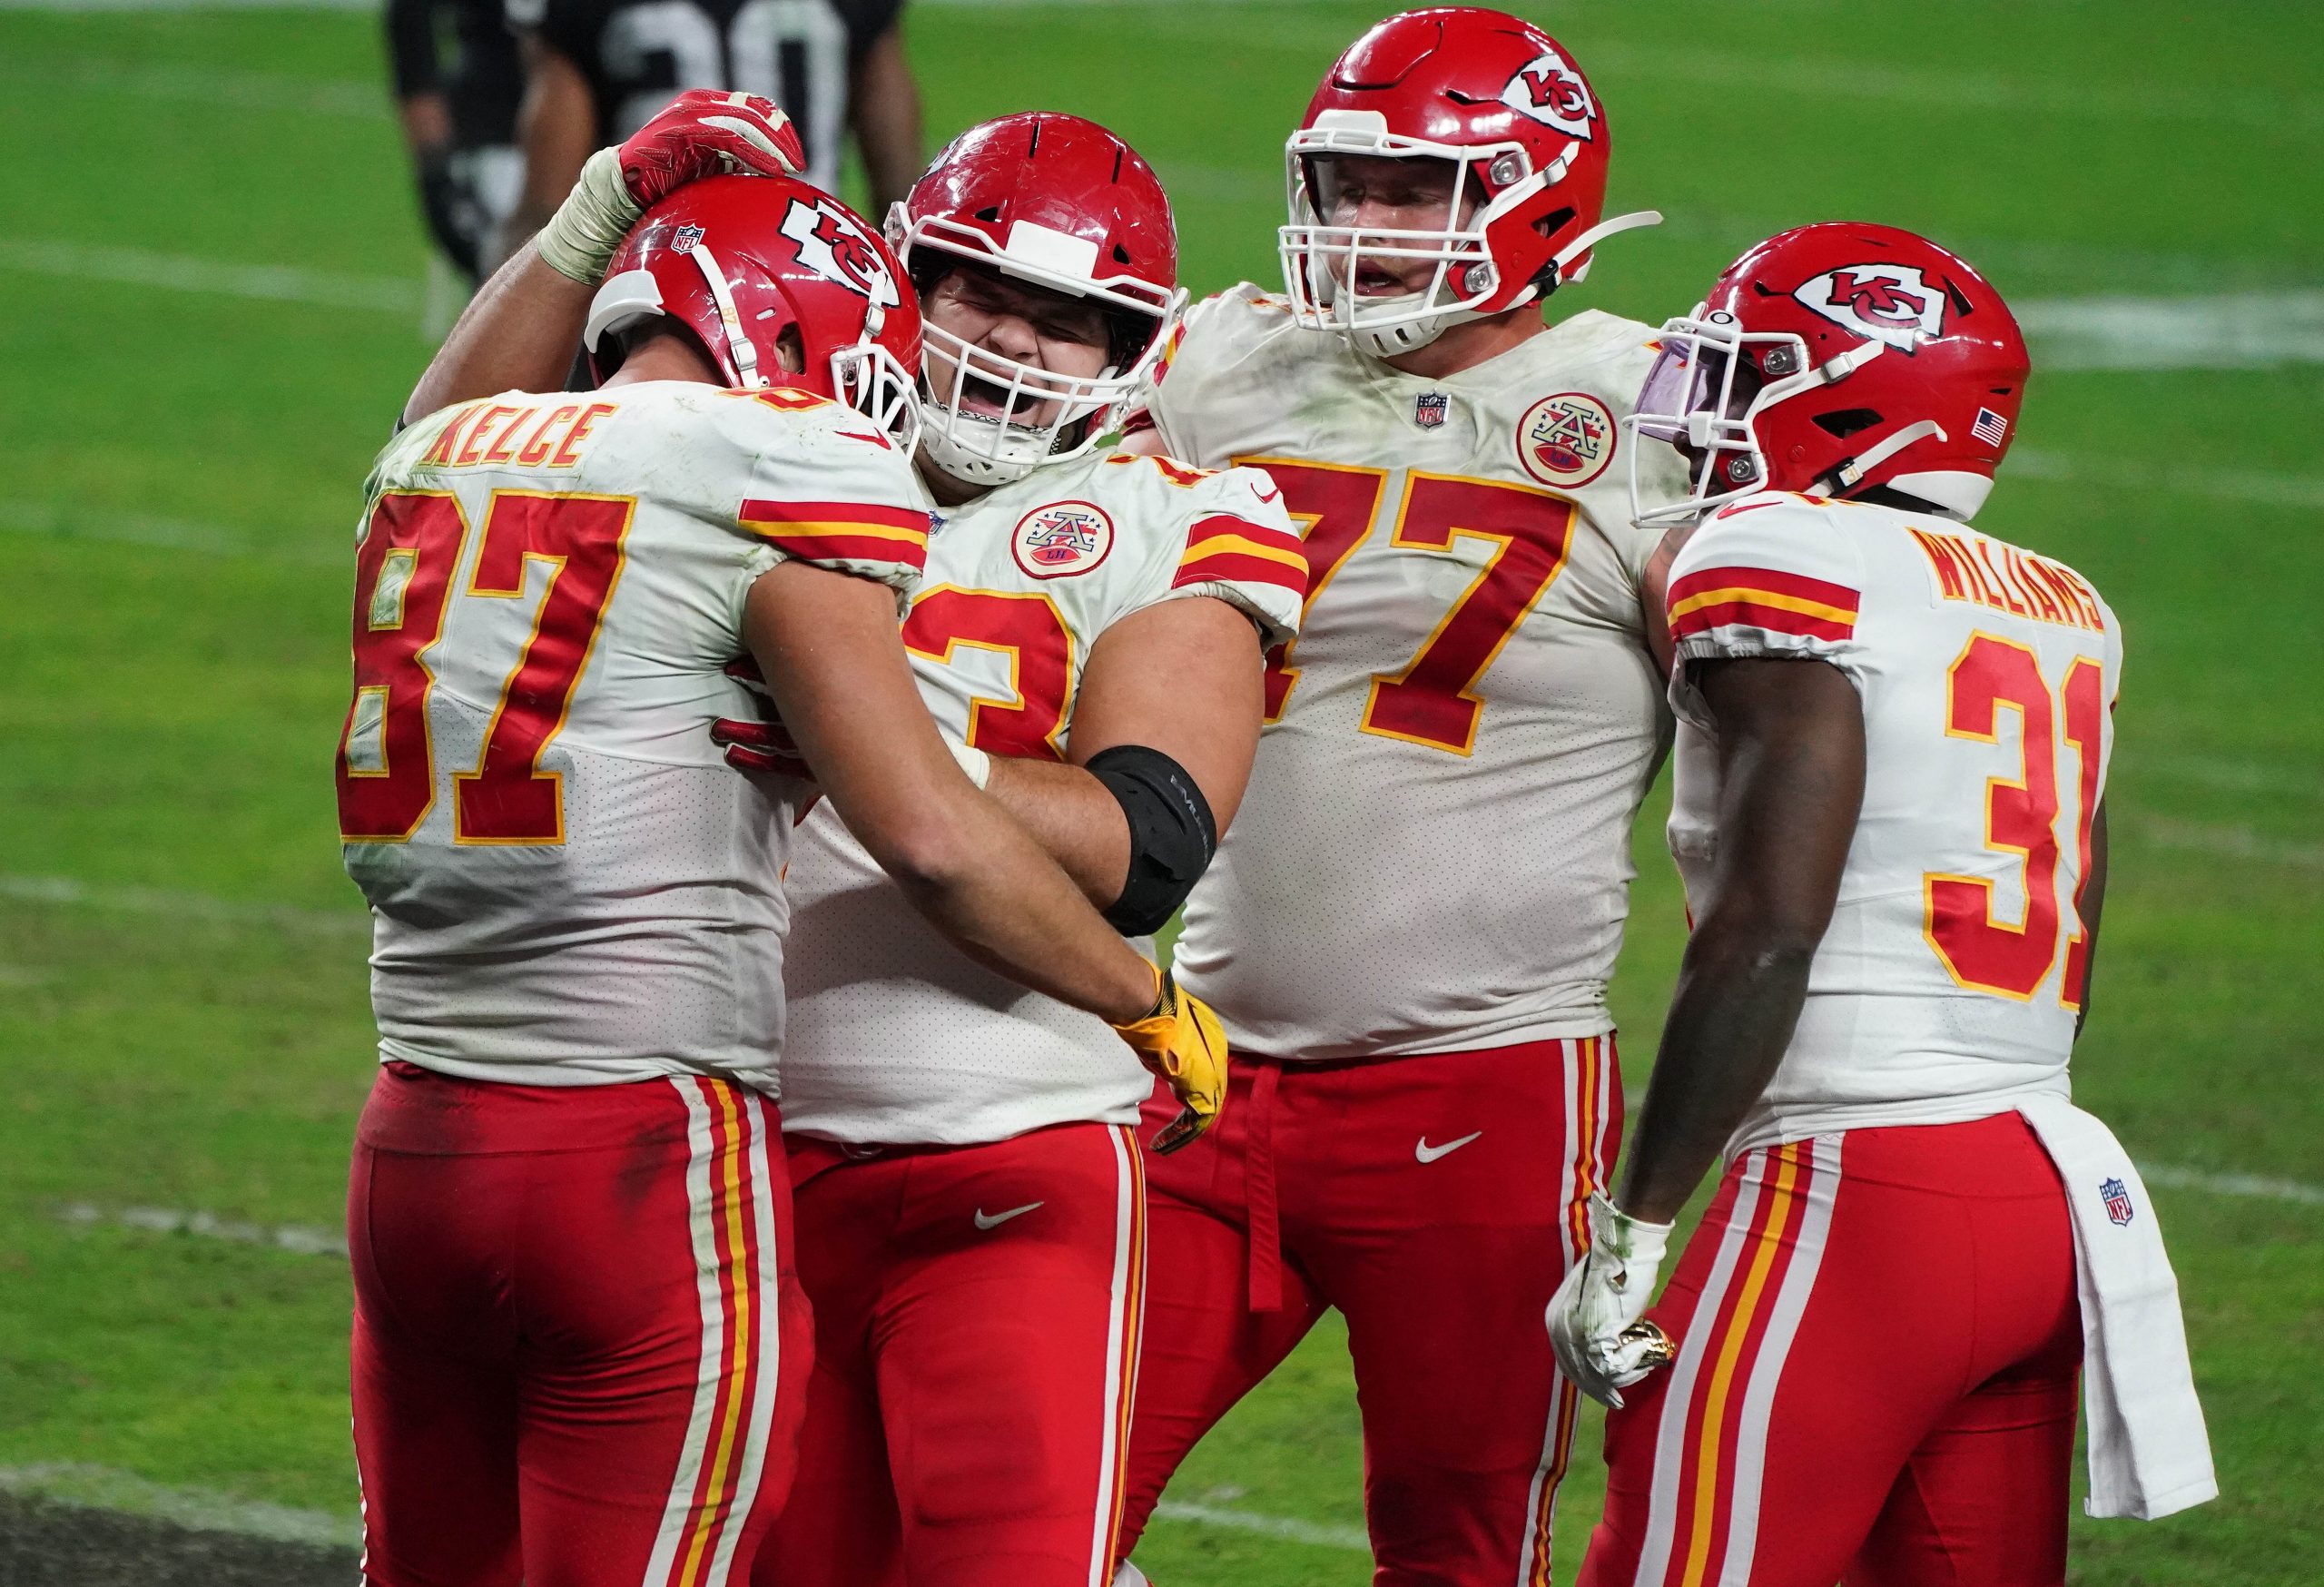 Kansas City Chiefs tight end Travis Kelce (87) celebrates with offensive guard Nick Allegretti (73) offensive guard Andrew Wylie (77) running back Darrel Williams (31) his touchdown pass scored against the Las Vegas Raiders.